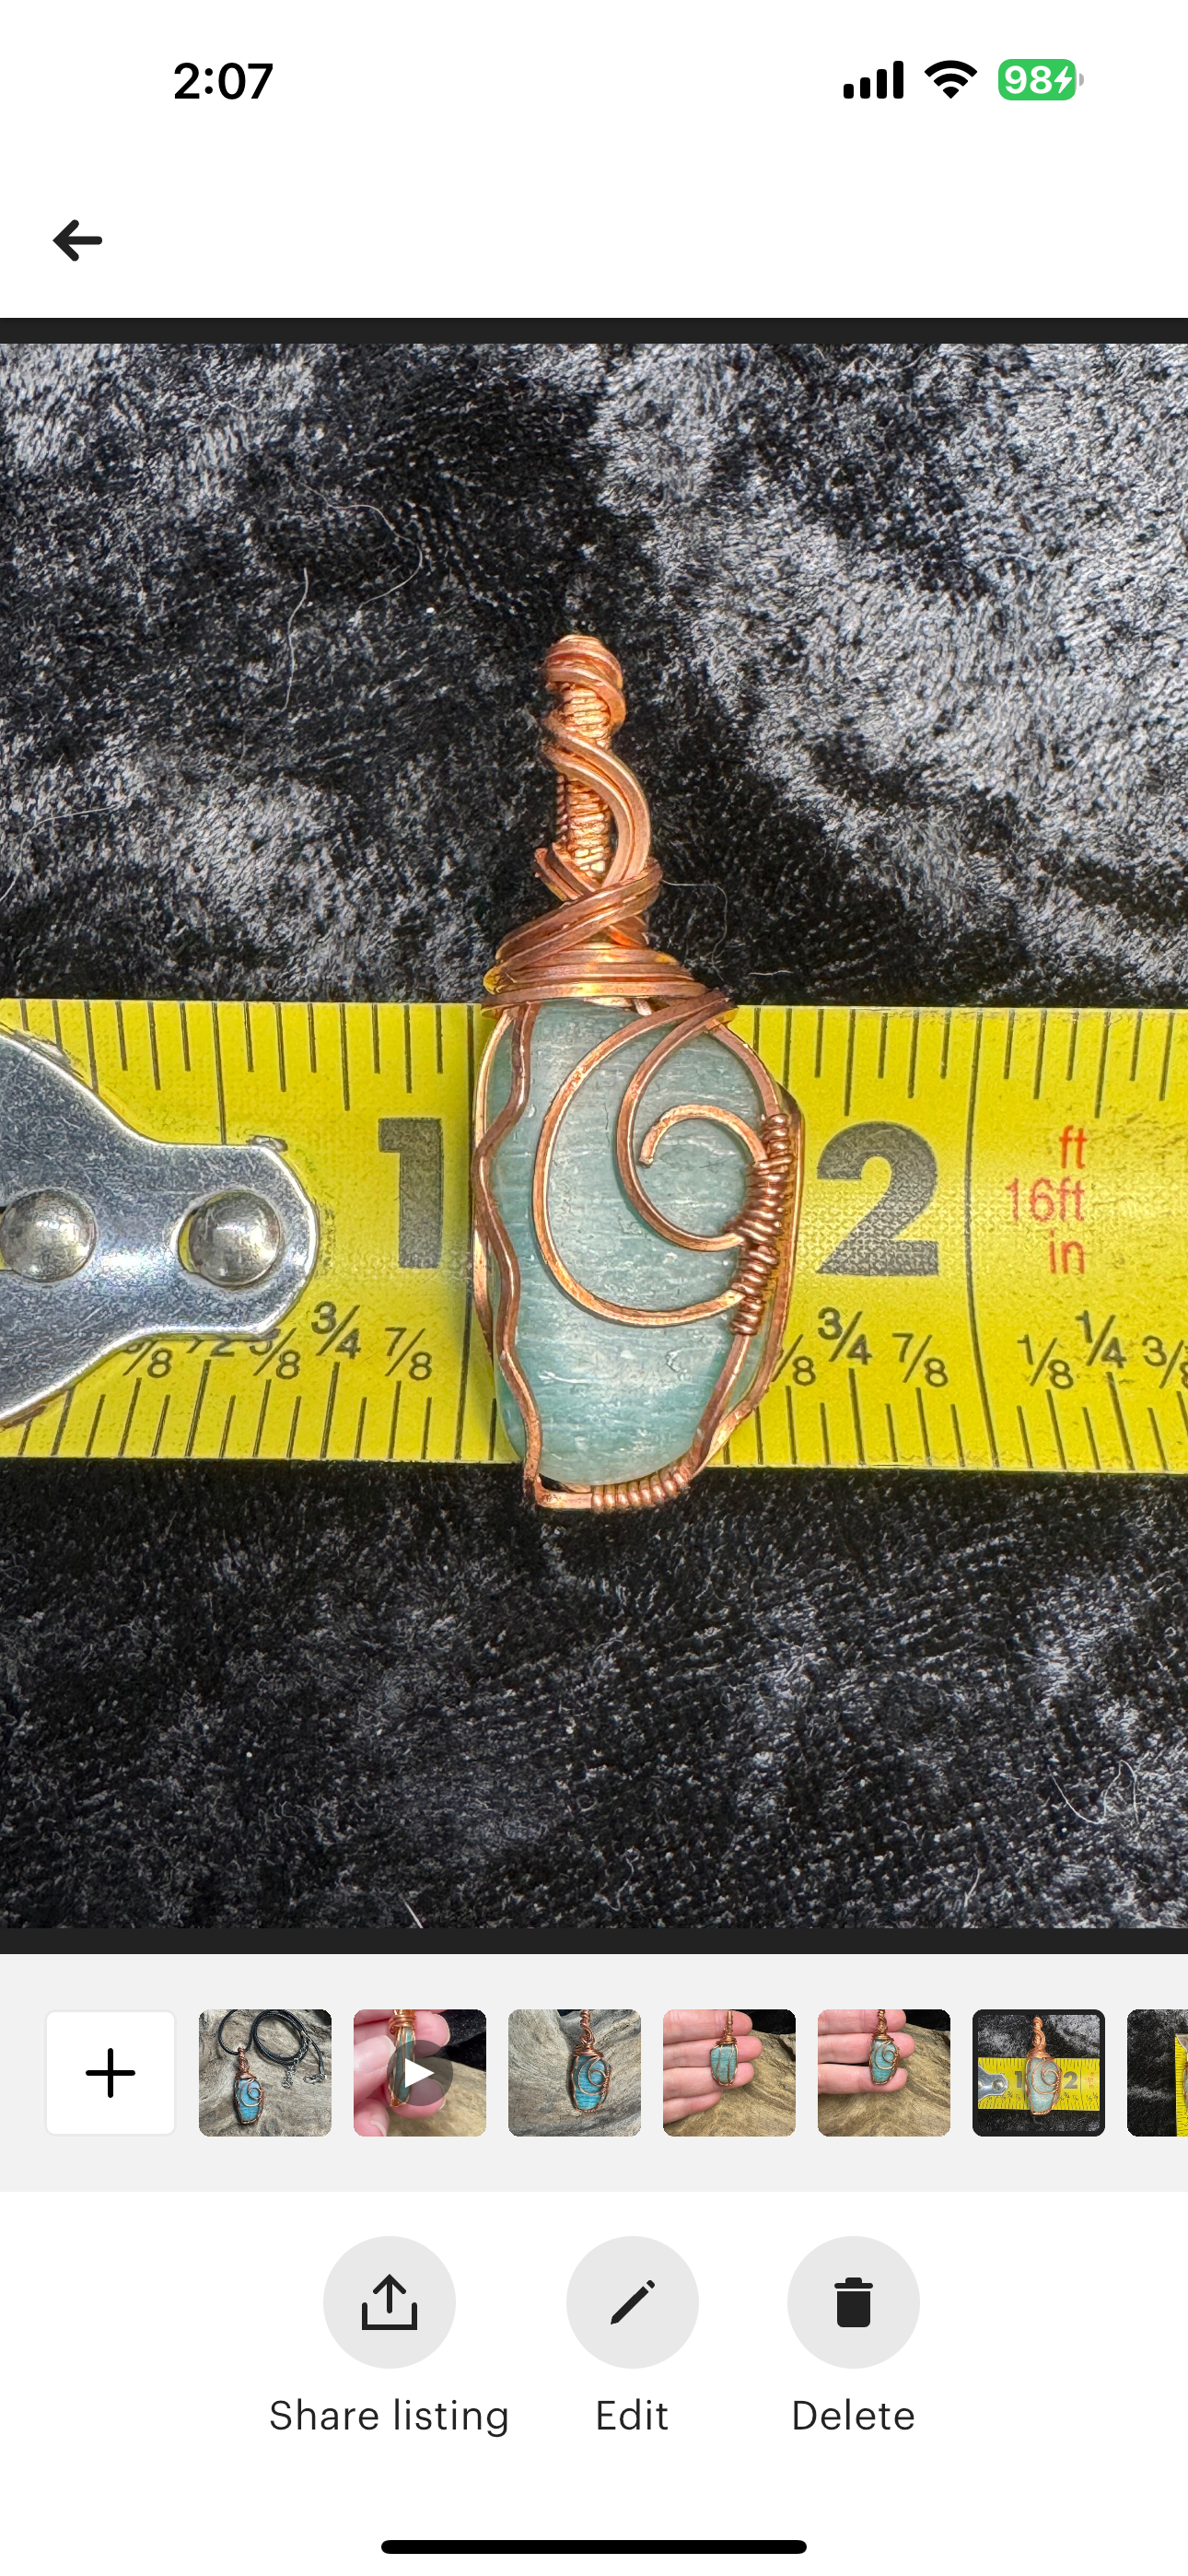 Amazonite wire wrapped pendant - I am at ease